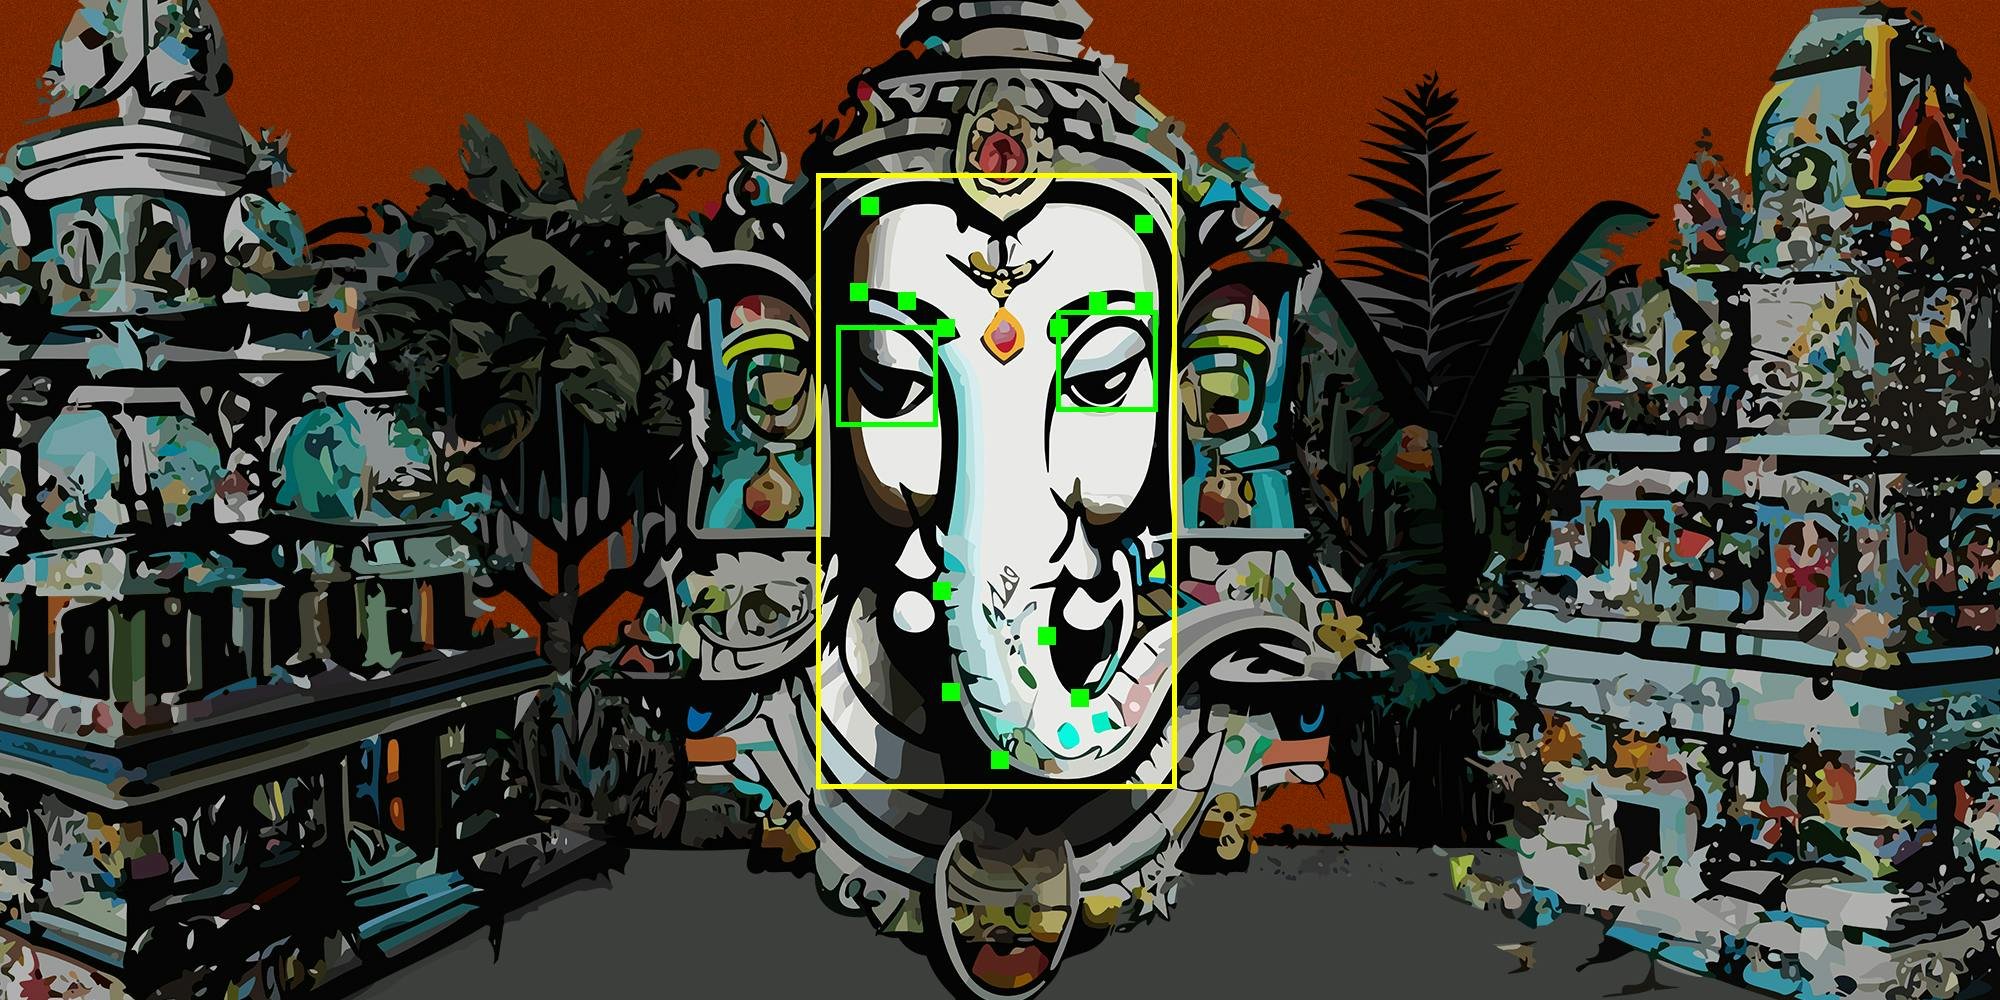 Hindu's holiest pilgrimages are now training grounds for authoritarian AI algorithms